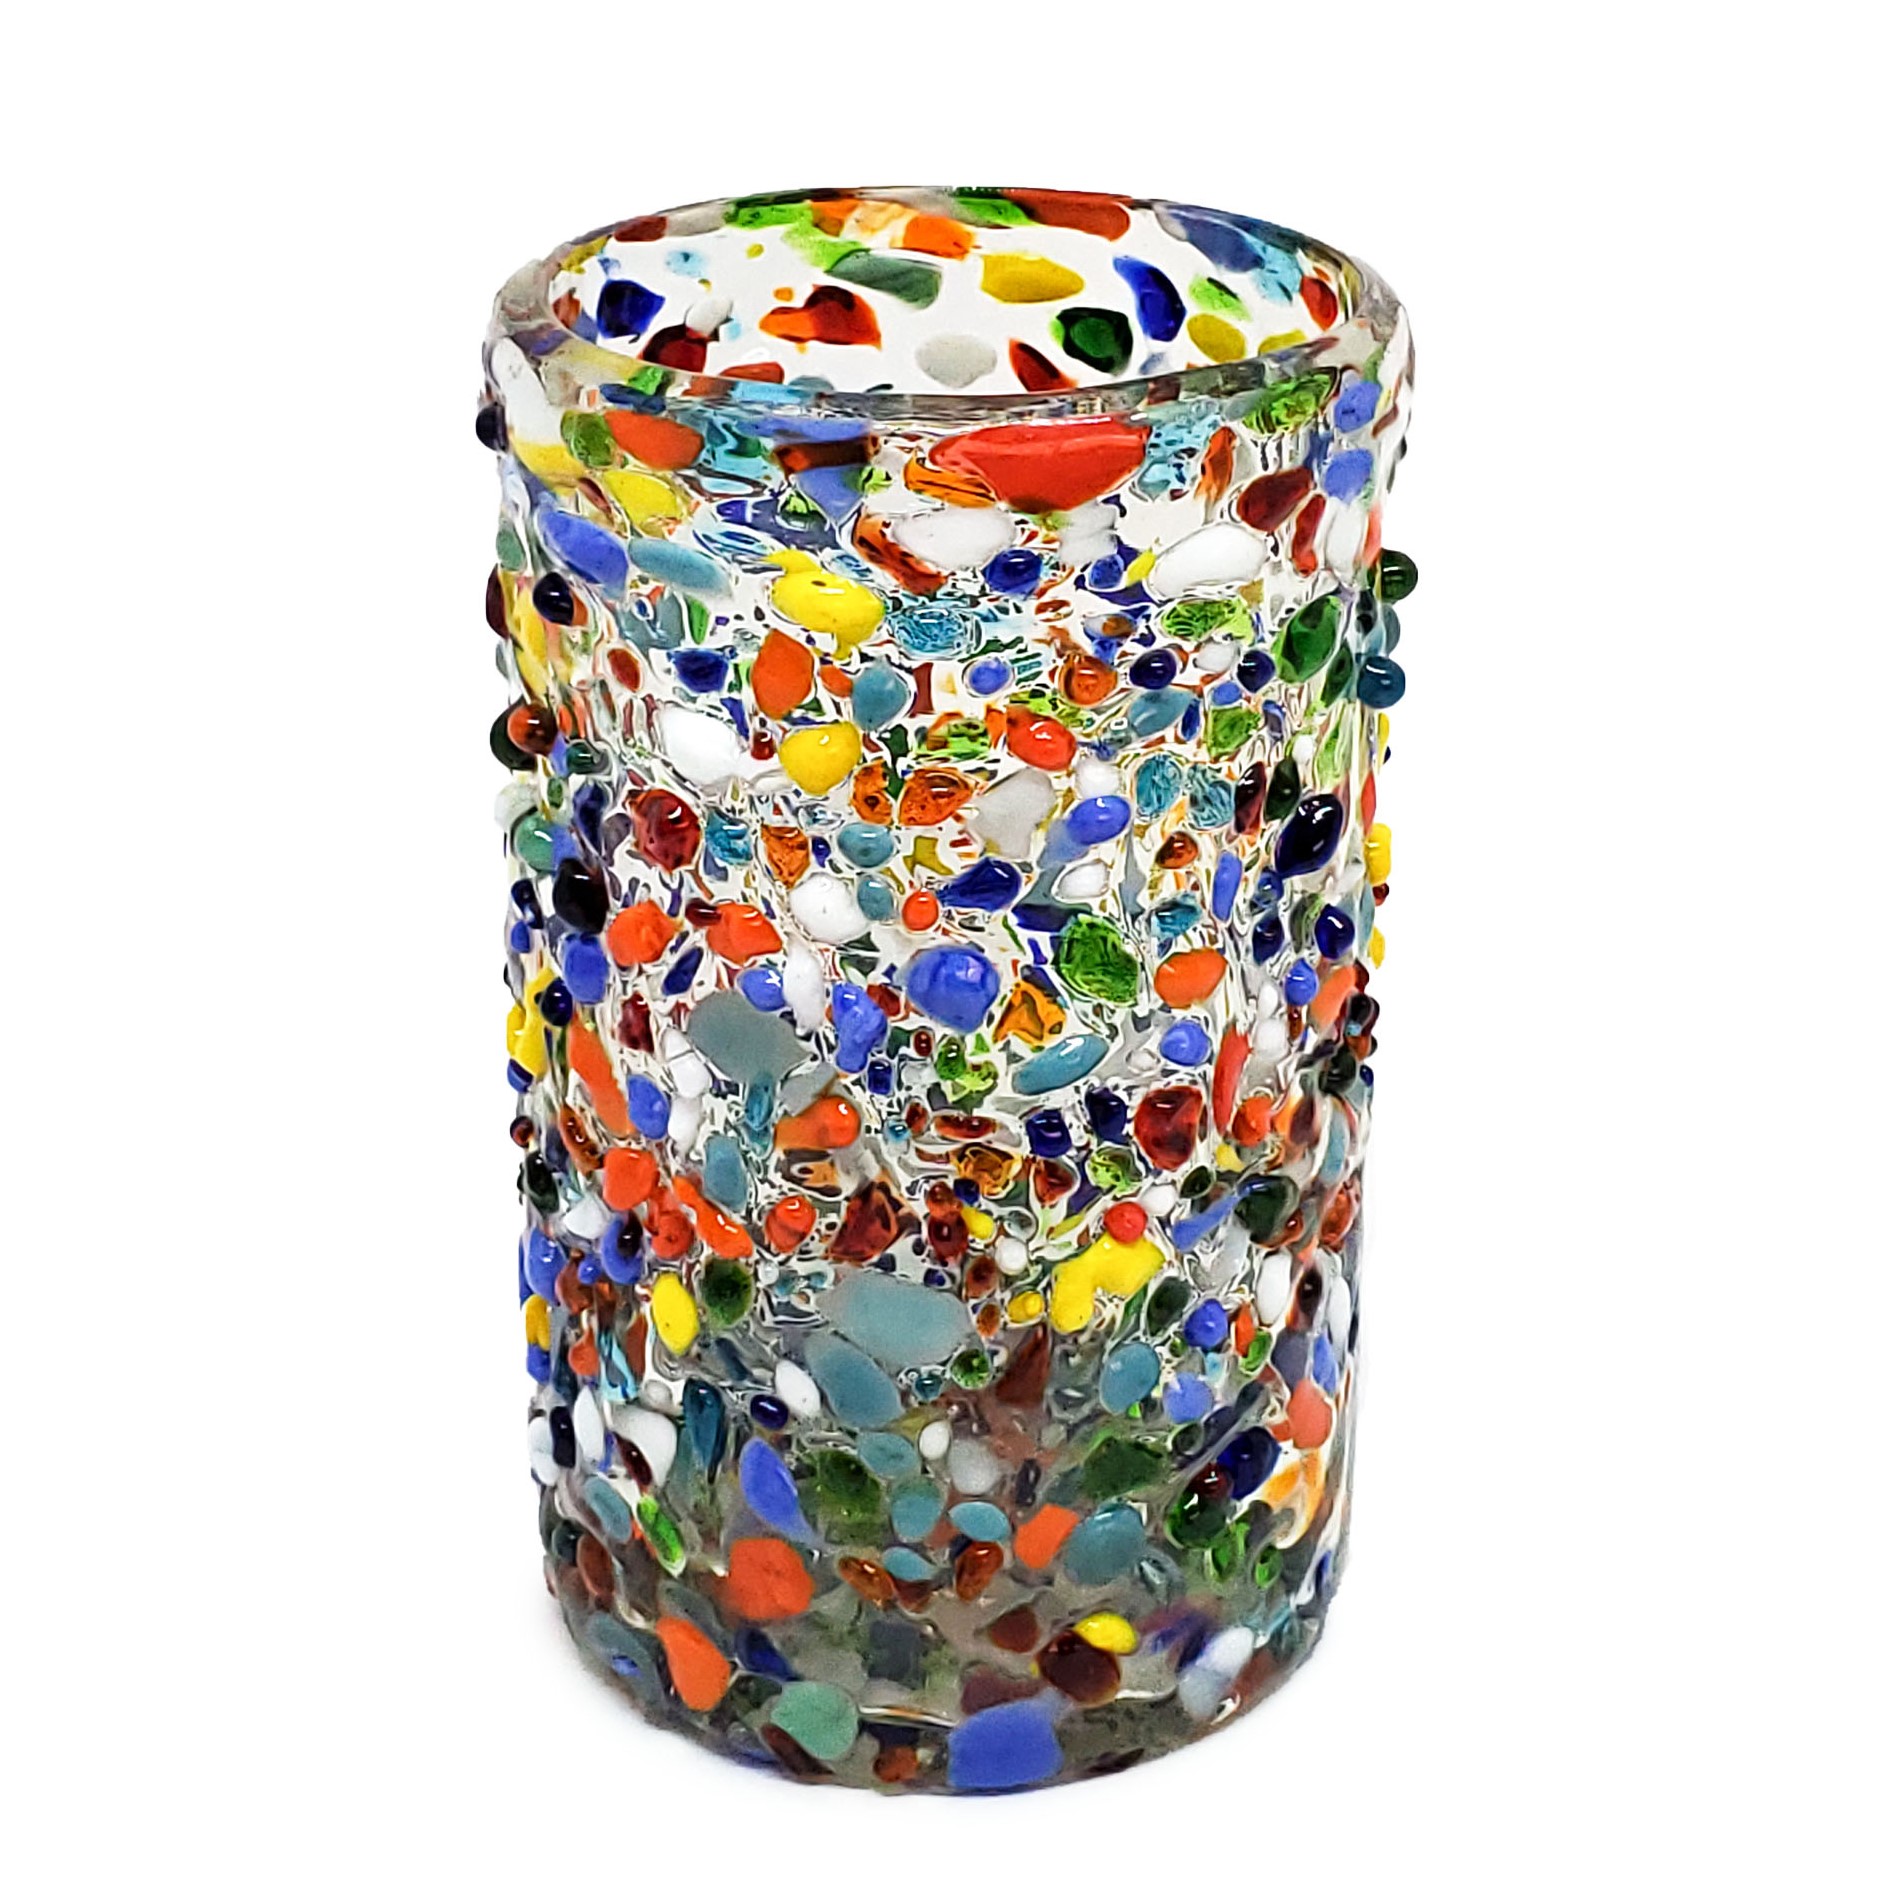 Confetti Glassware / Confetti Rocks 14 oz Drinking Glasses (set of 6) / Let the spring come into your home with this colorful set of glasses. The multicolor glass rocks decoration makes them a standout in any place.